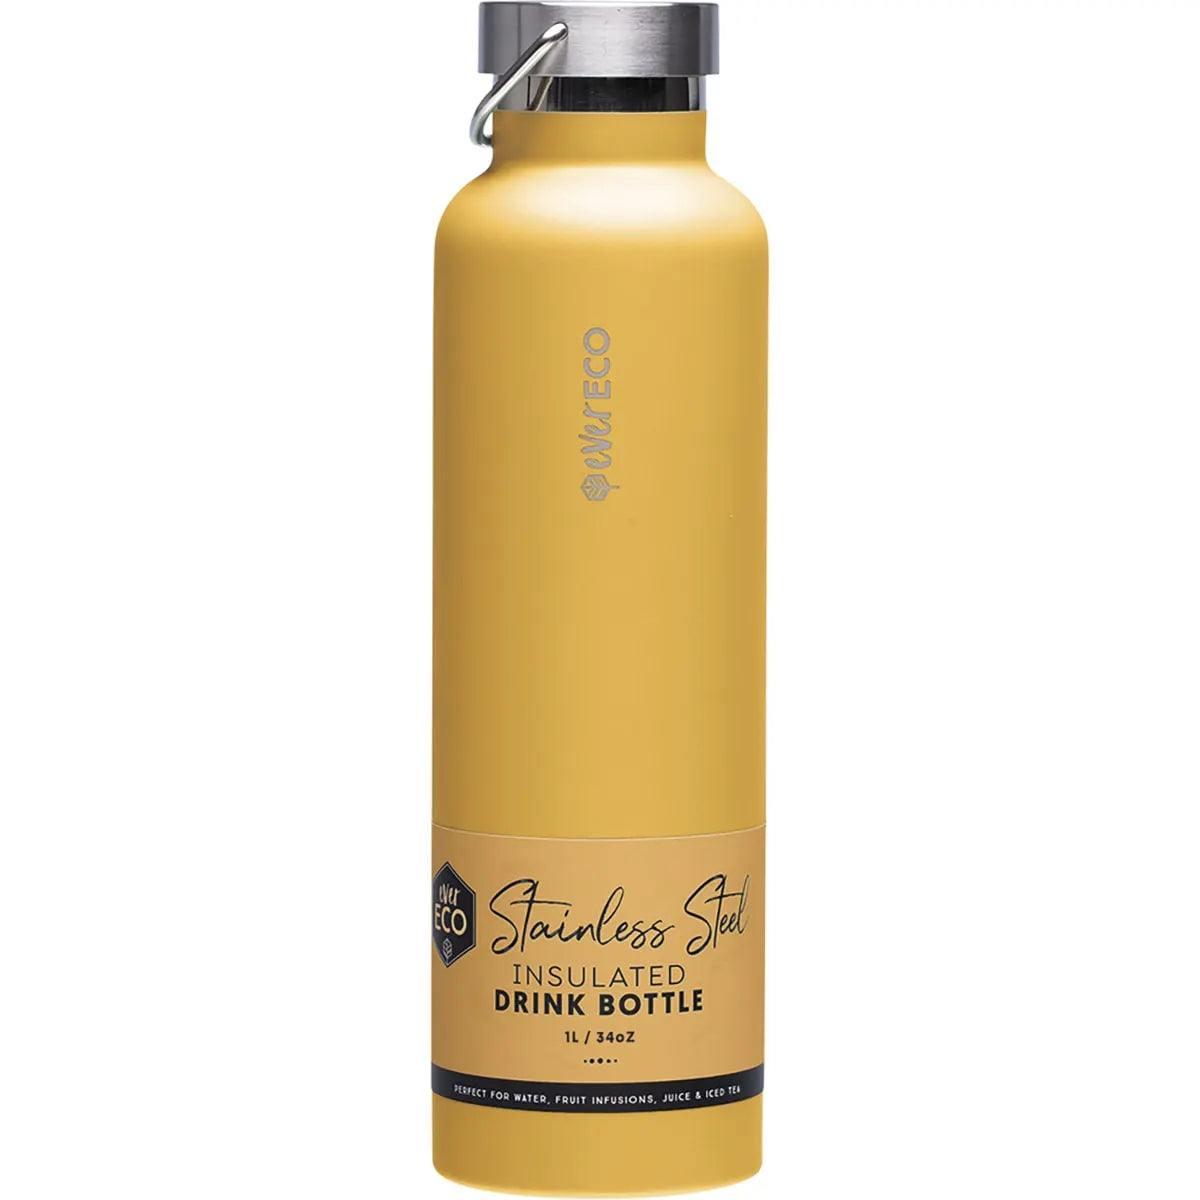 Ever Eco Stainless Steel Drink Bottle - 1L (8360939782419)